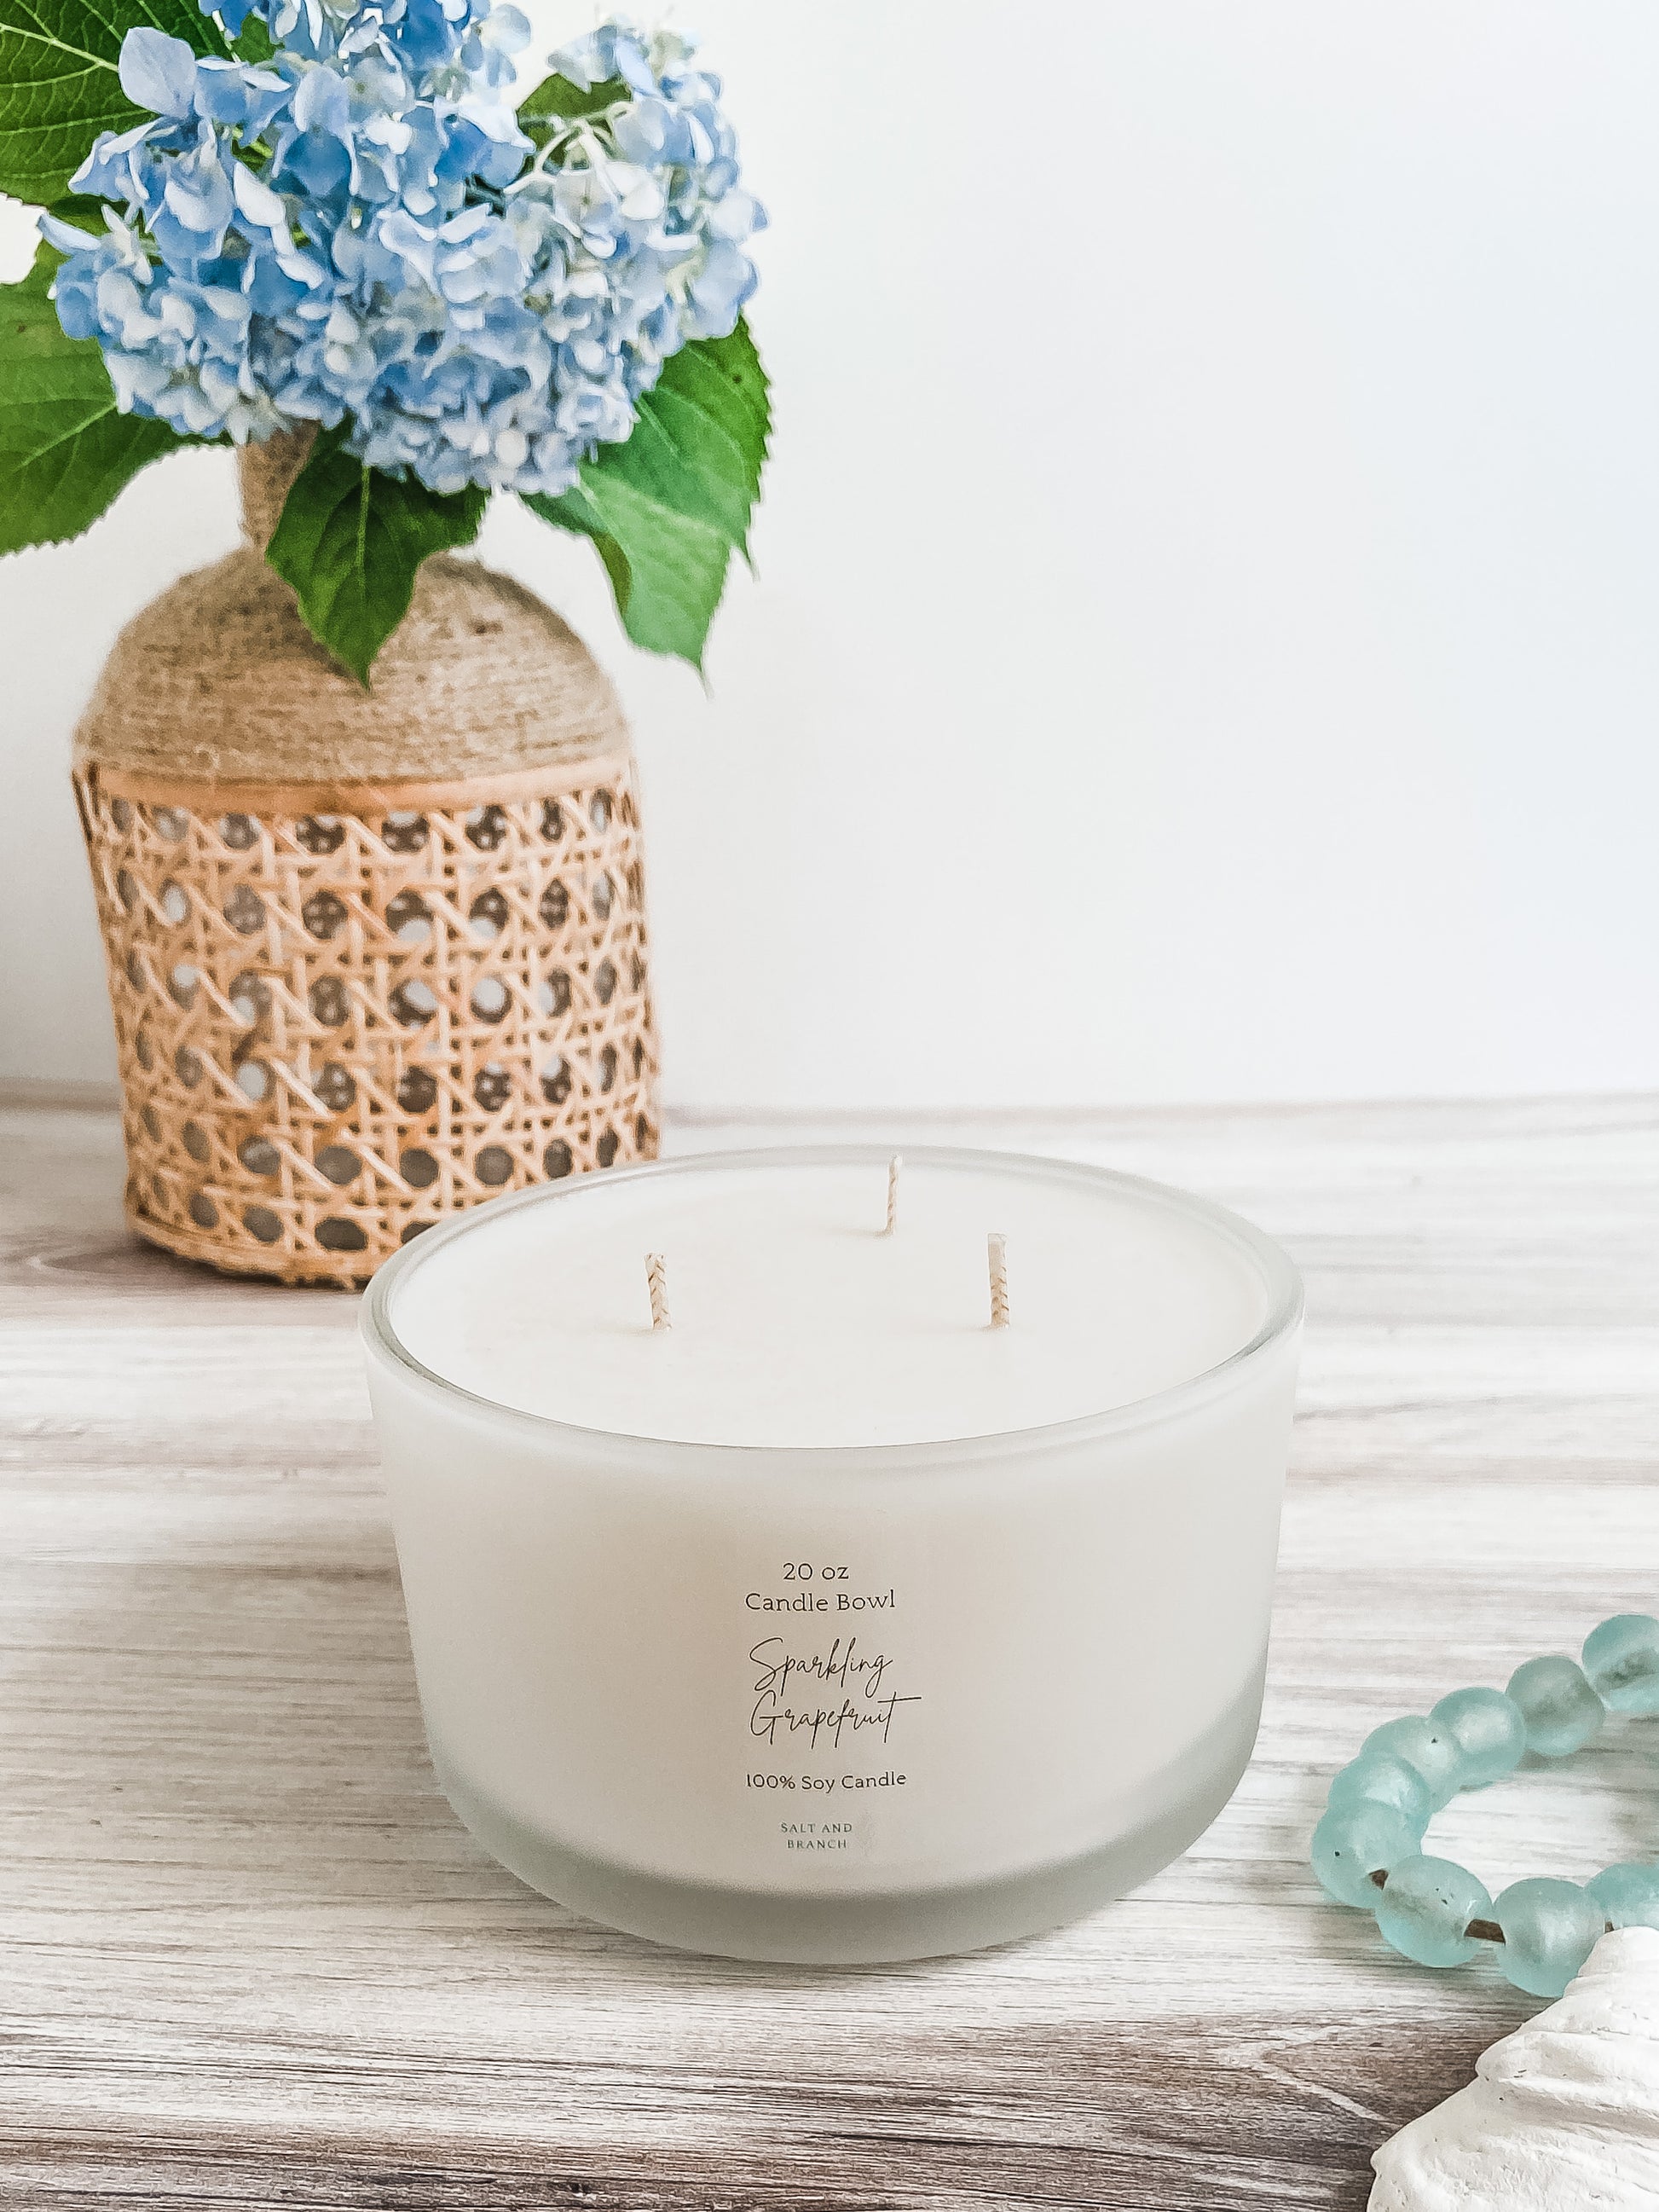 Sparkling Grapefruit 3 Wick Soy Candle  Frosted Bowl